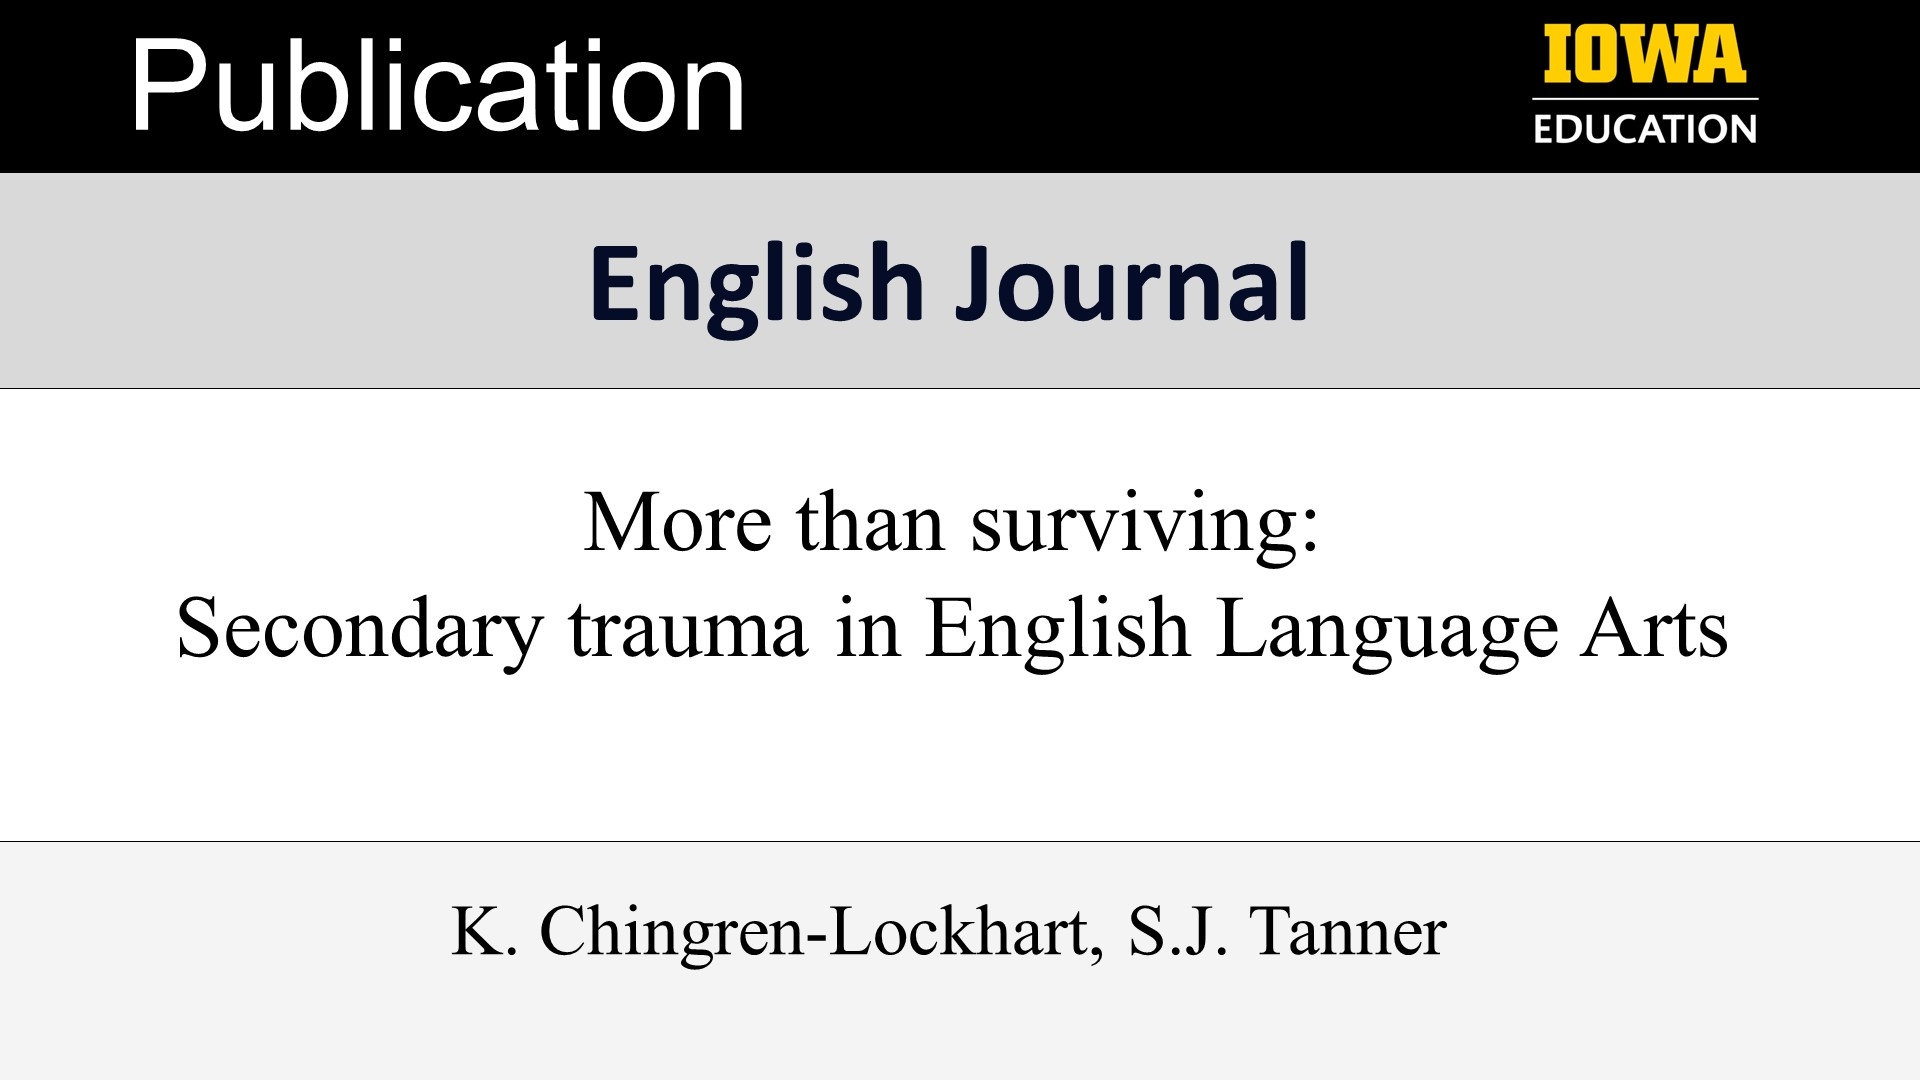 Publication: More than surviving: Secondary trauma in English Language Arts. In English Journal